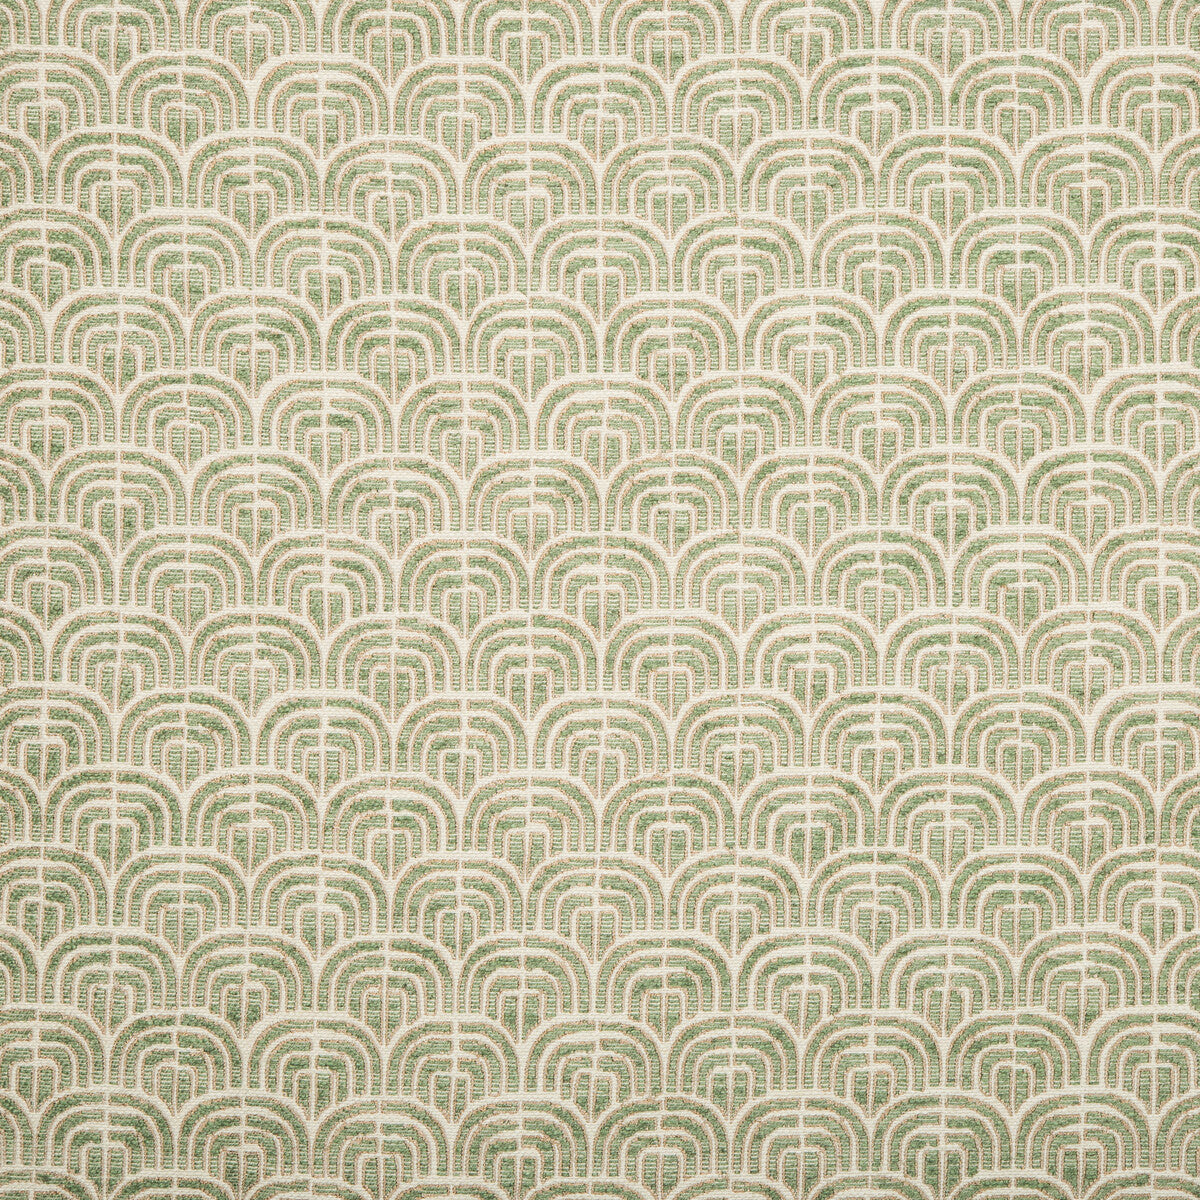 Bale fabric in moss color - pattern 2019155.3.0 - by Lee Jofa in the Carrier And Company collection